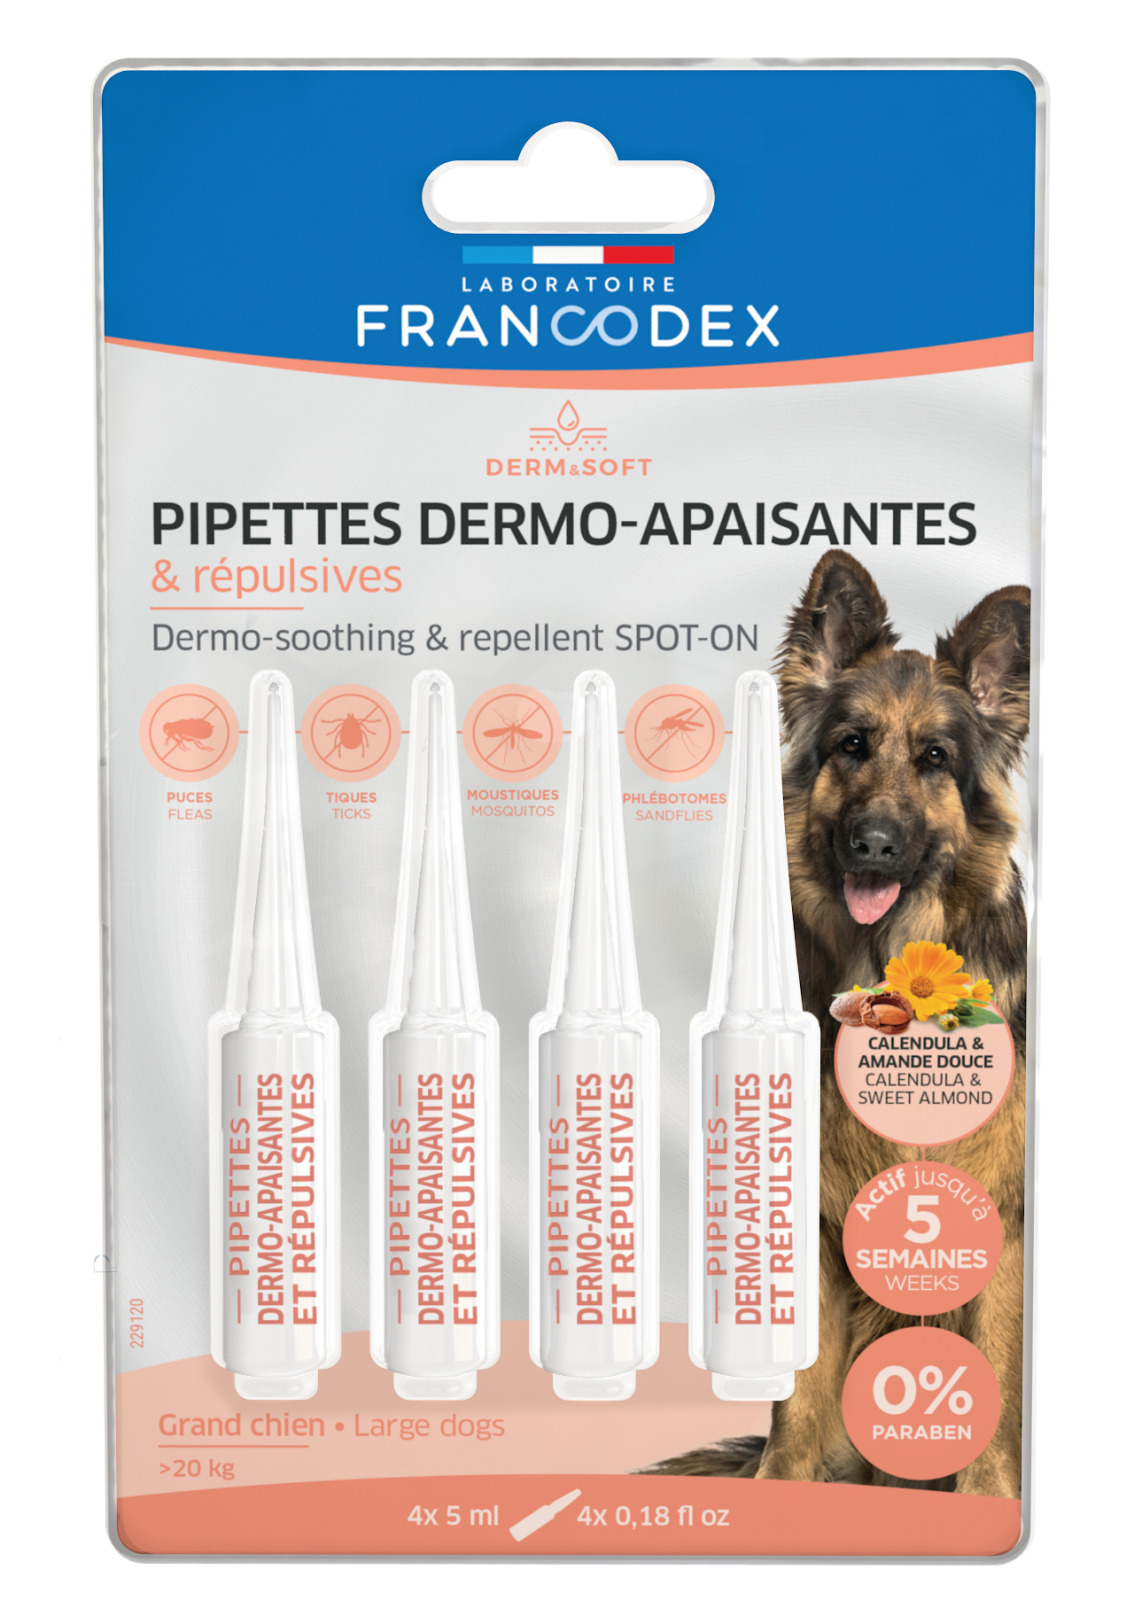 Francodex Pipettes Dermo Insectifuges pour chien x4